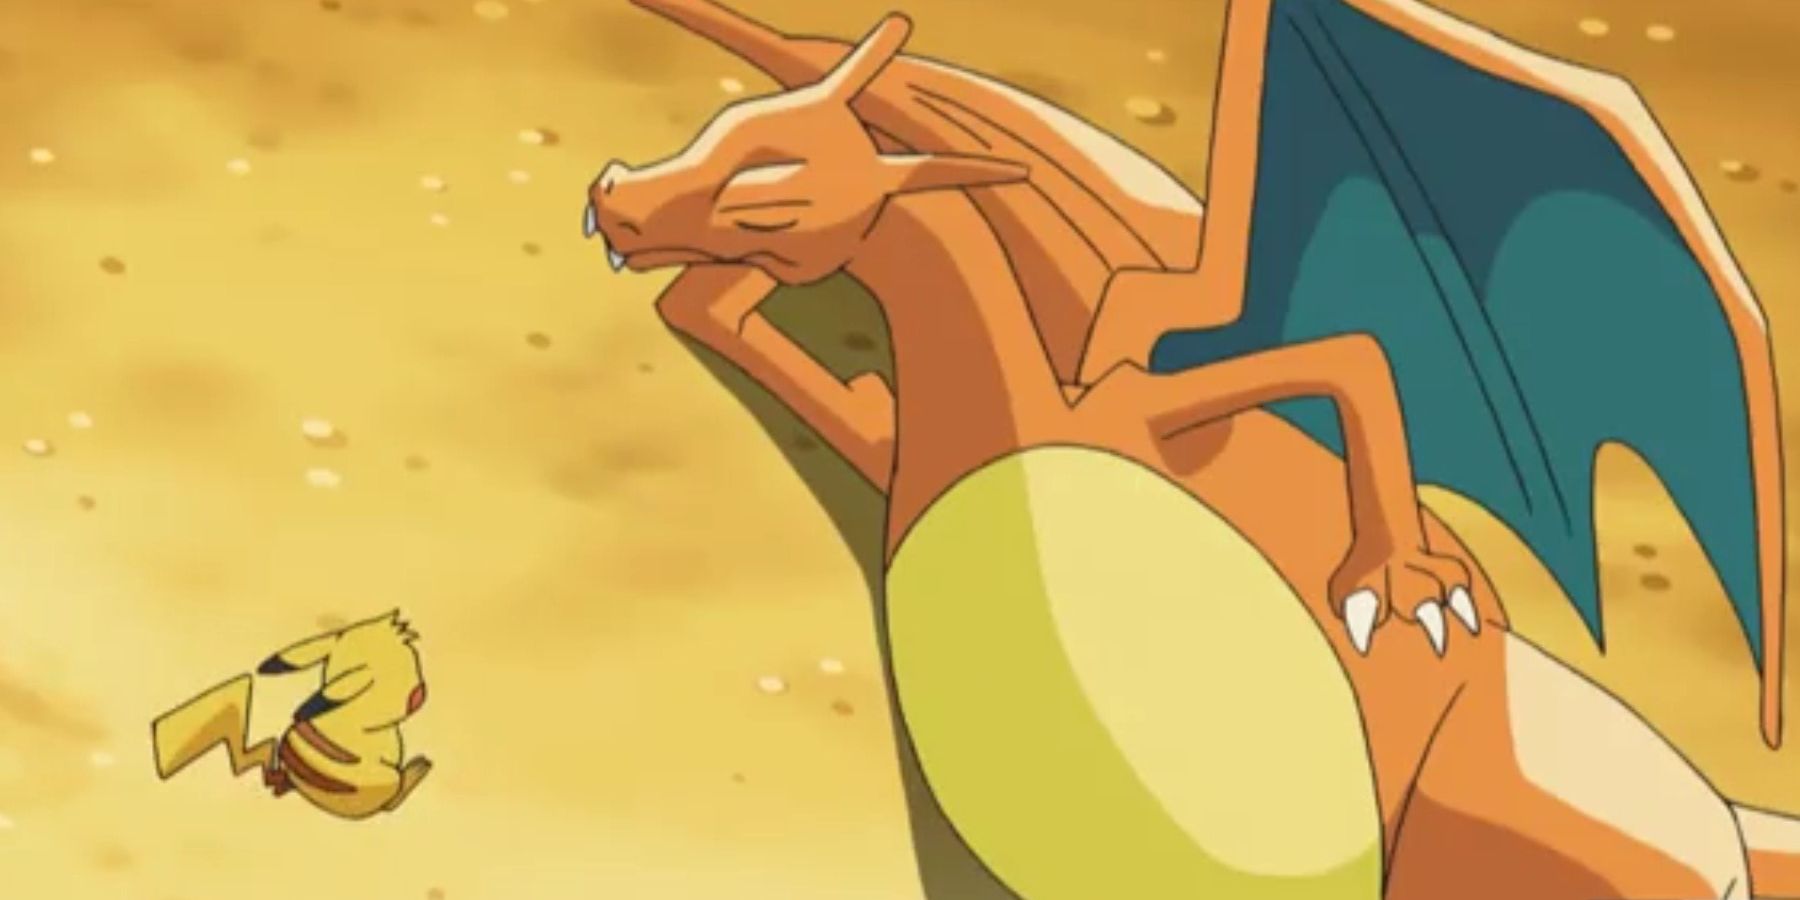 charizard refuses to follow ash's orders